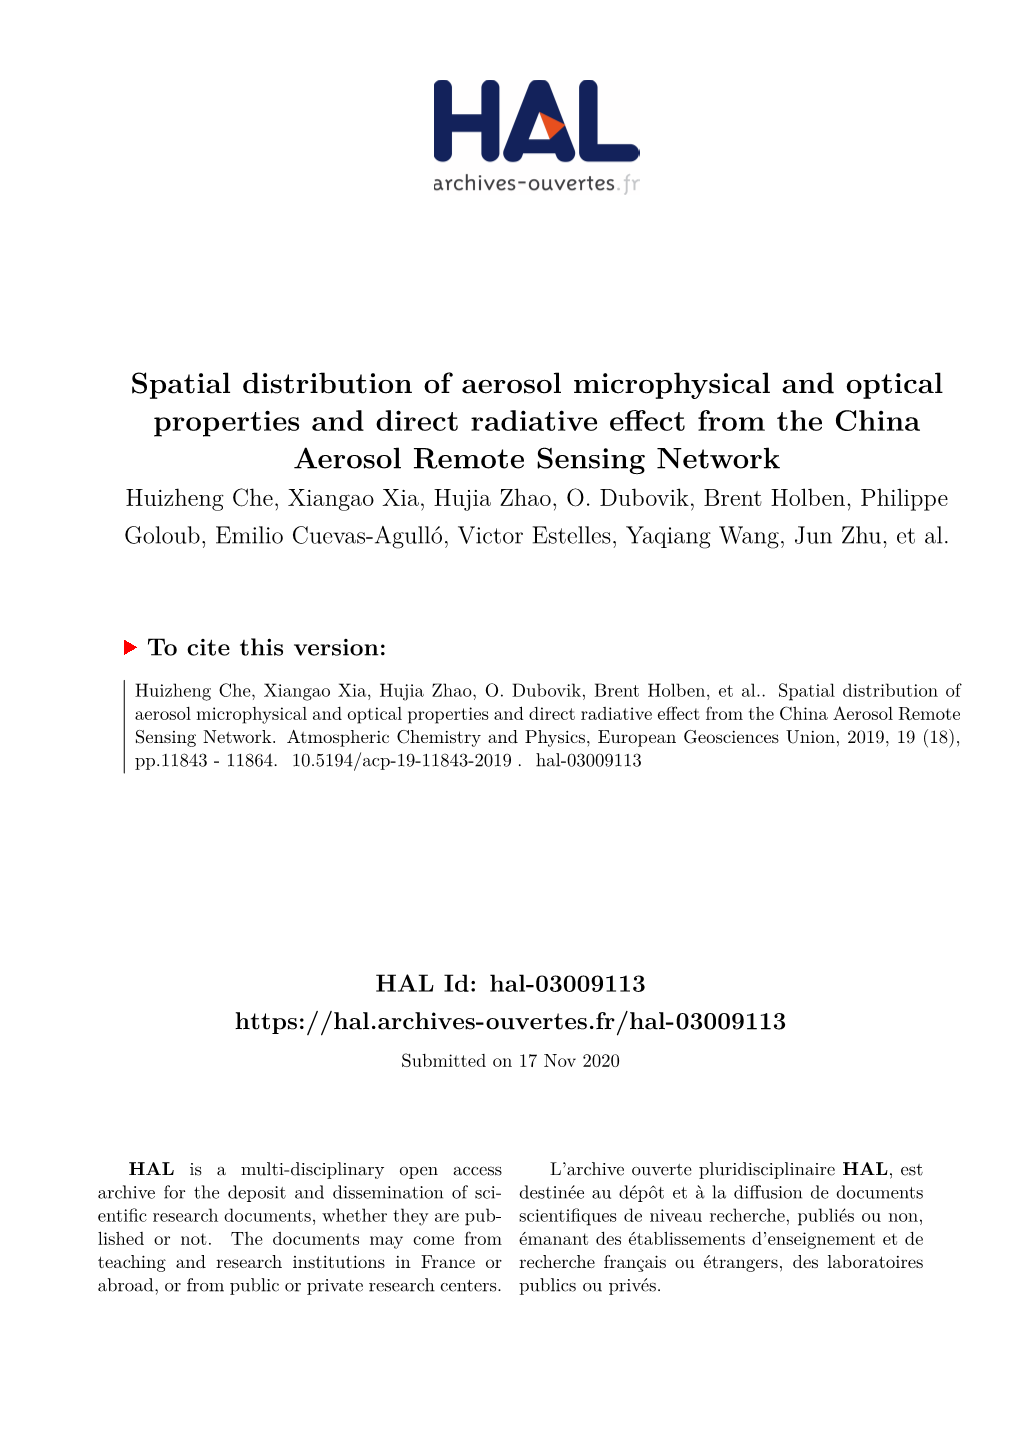 Spatial Distribution of Aerosol Microphysical and Optical